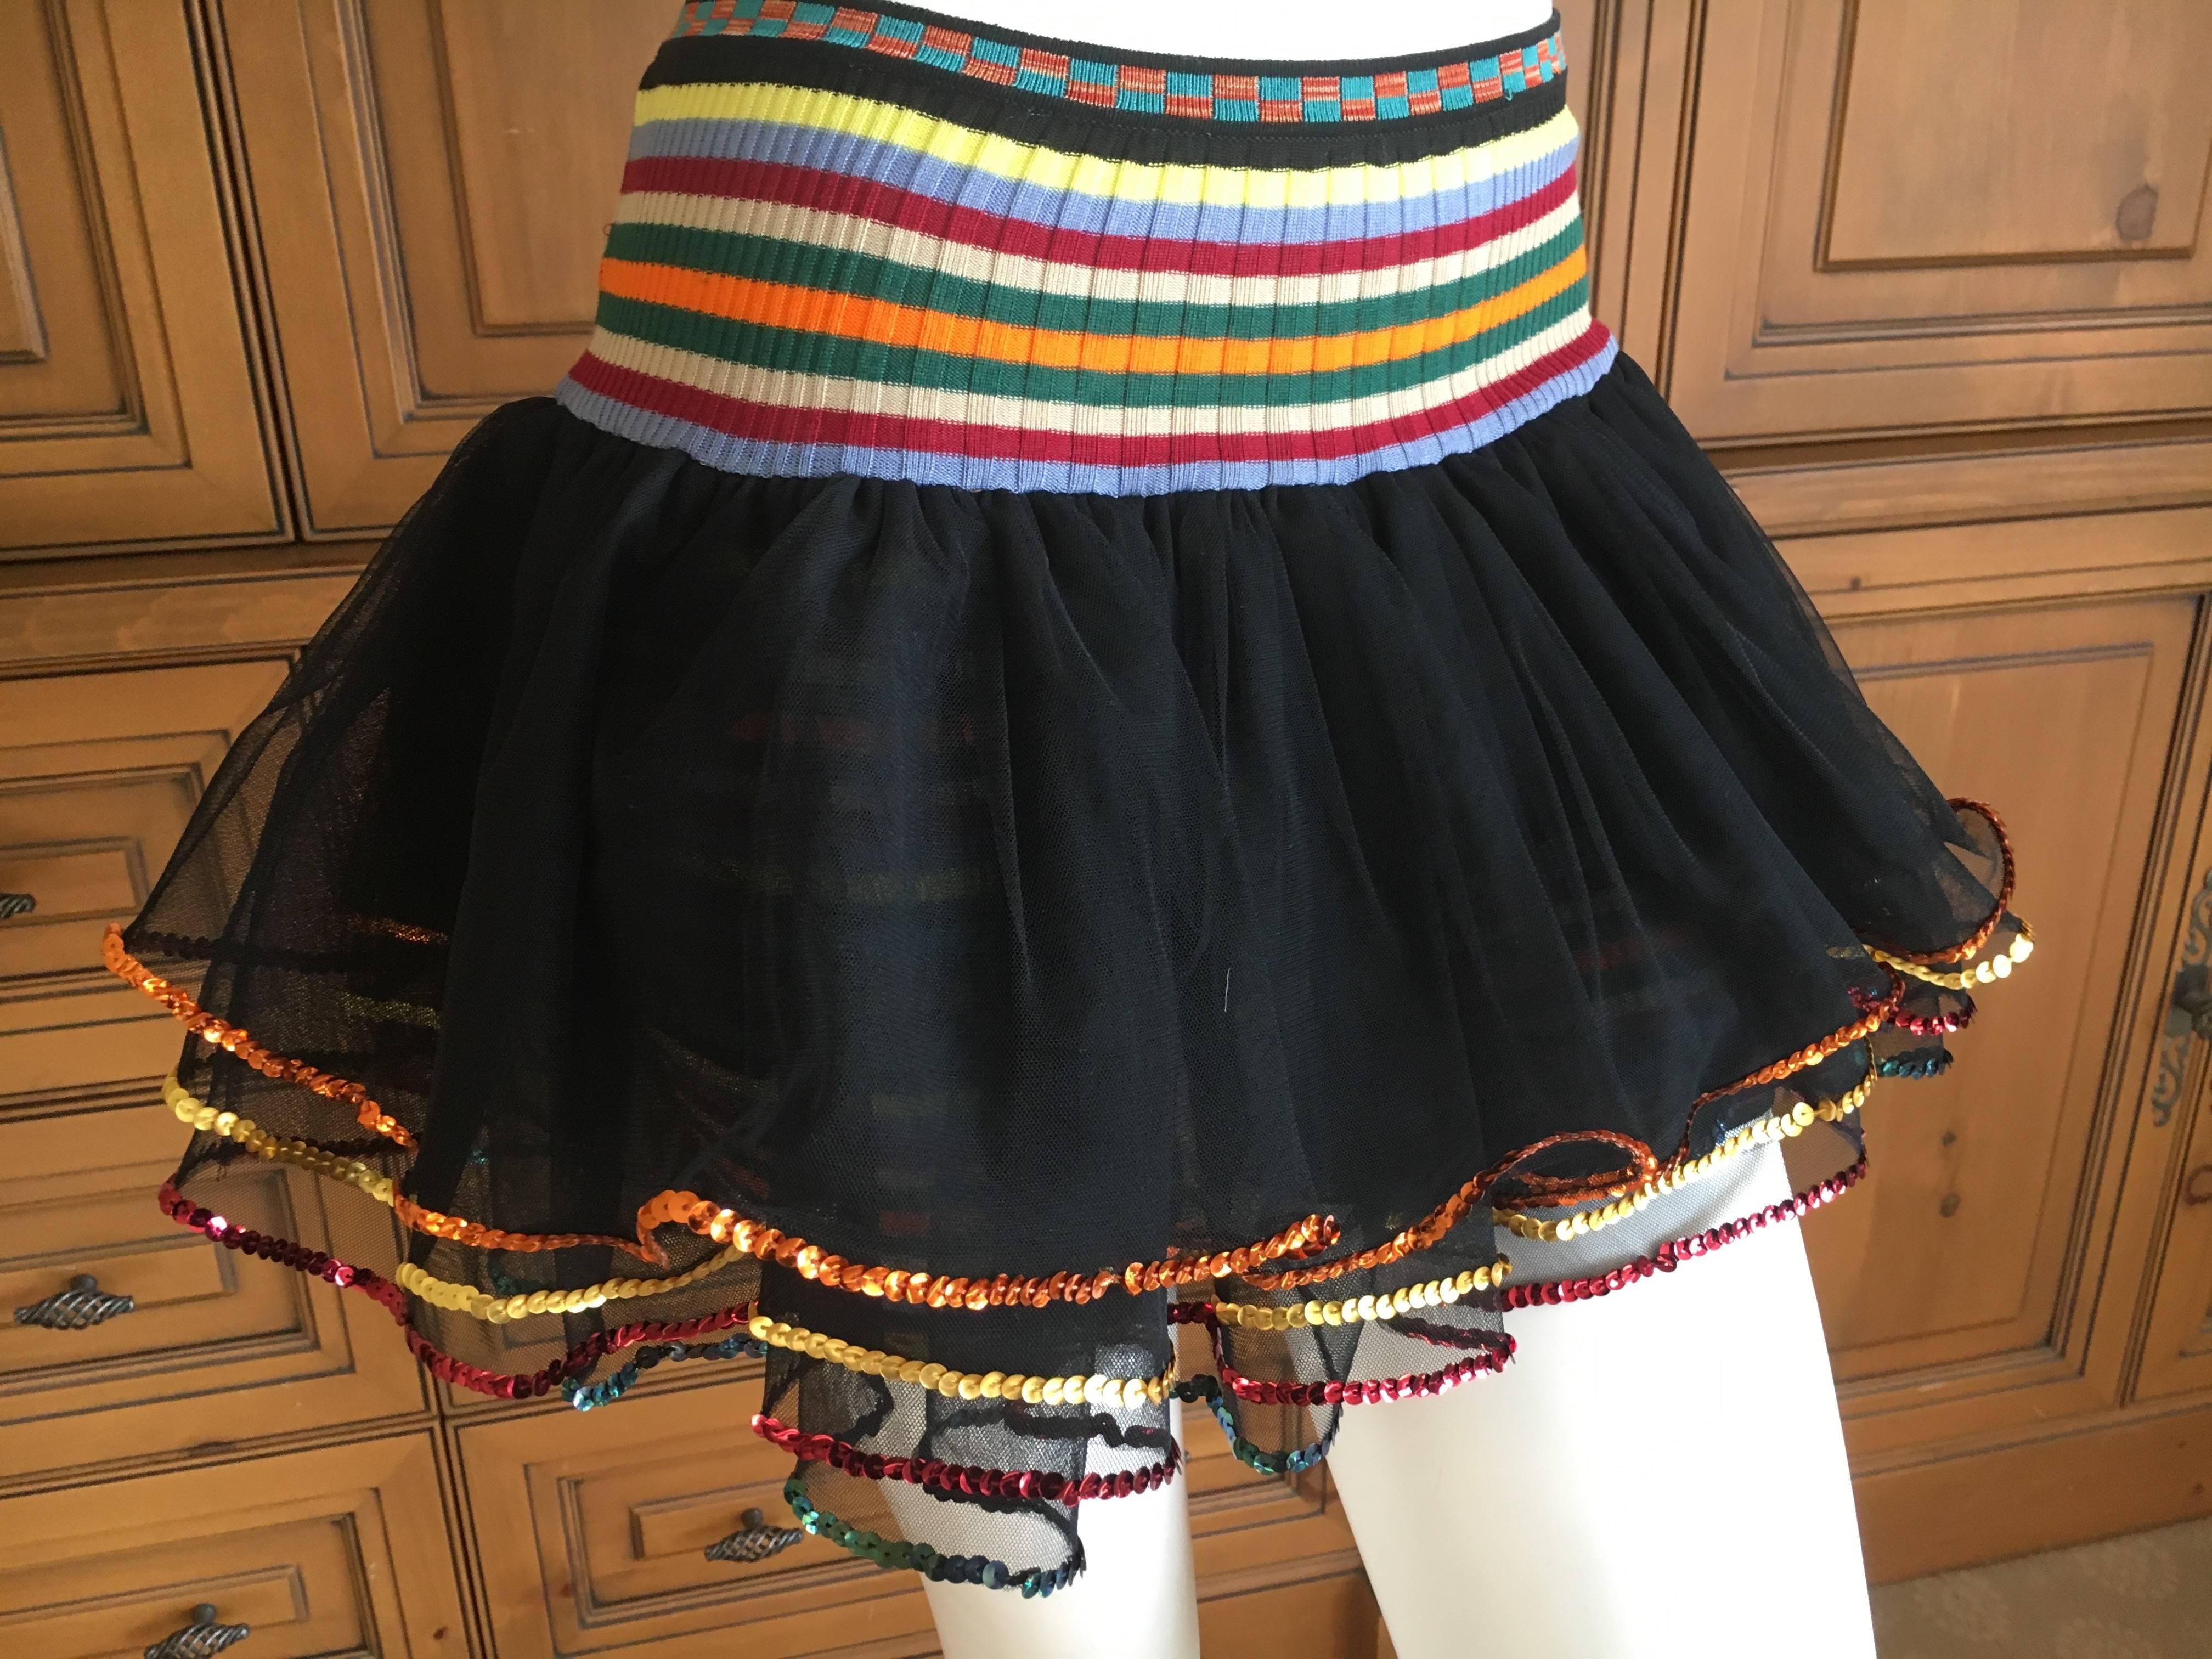 Jean Paul Gaultier 90's Club Kid Rainbow 2 Piece w Mini Can Can Skirt.
This is so sweet, featuring shorts with attached super short tulle can can skirts edged in sequins, and a matching copped top.
This is a ribbed stretch knit with a lot of